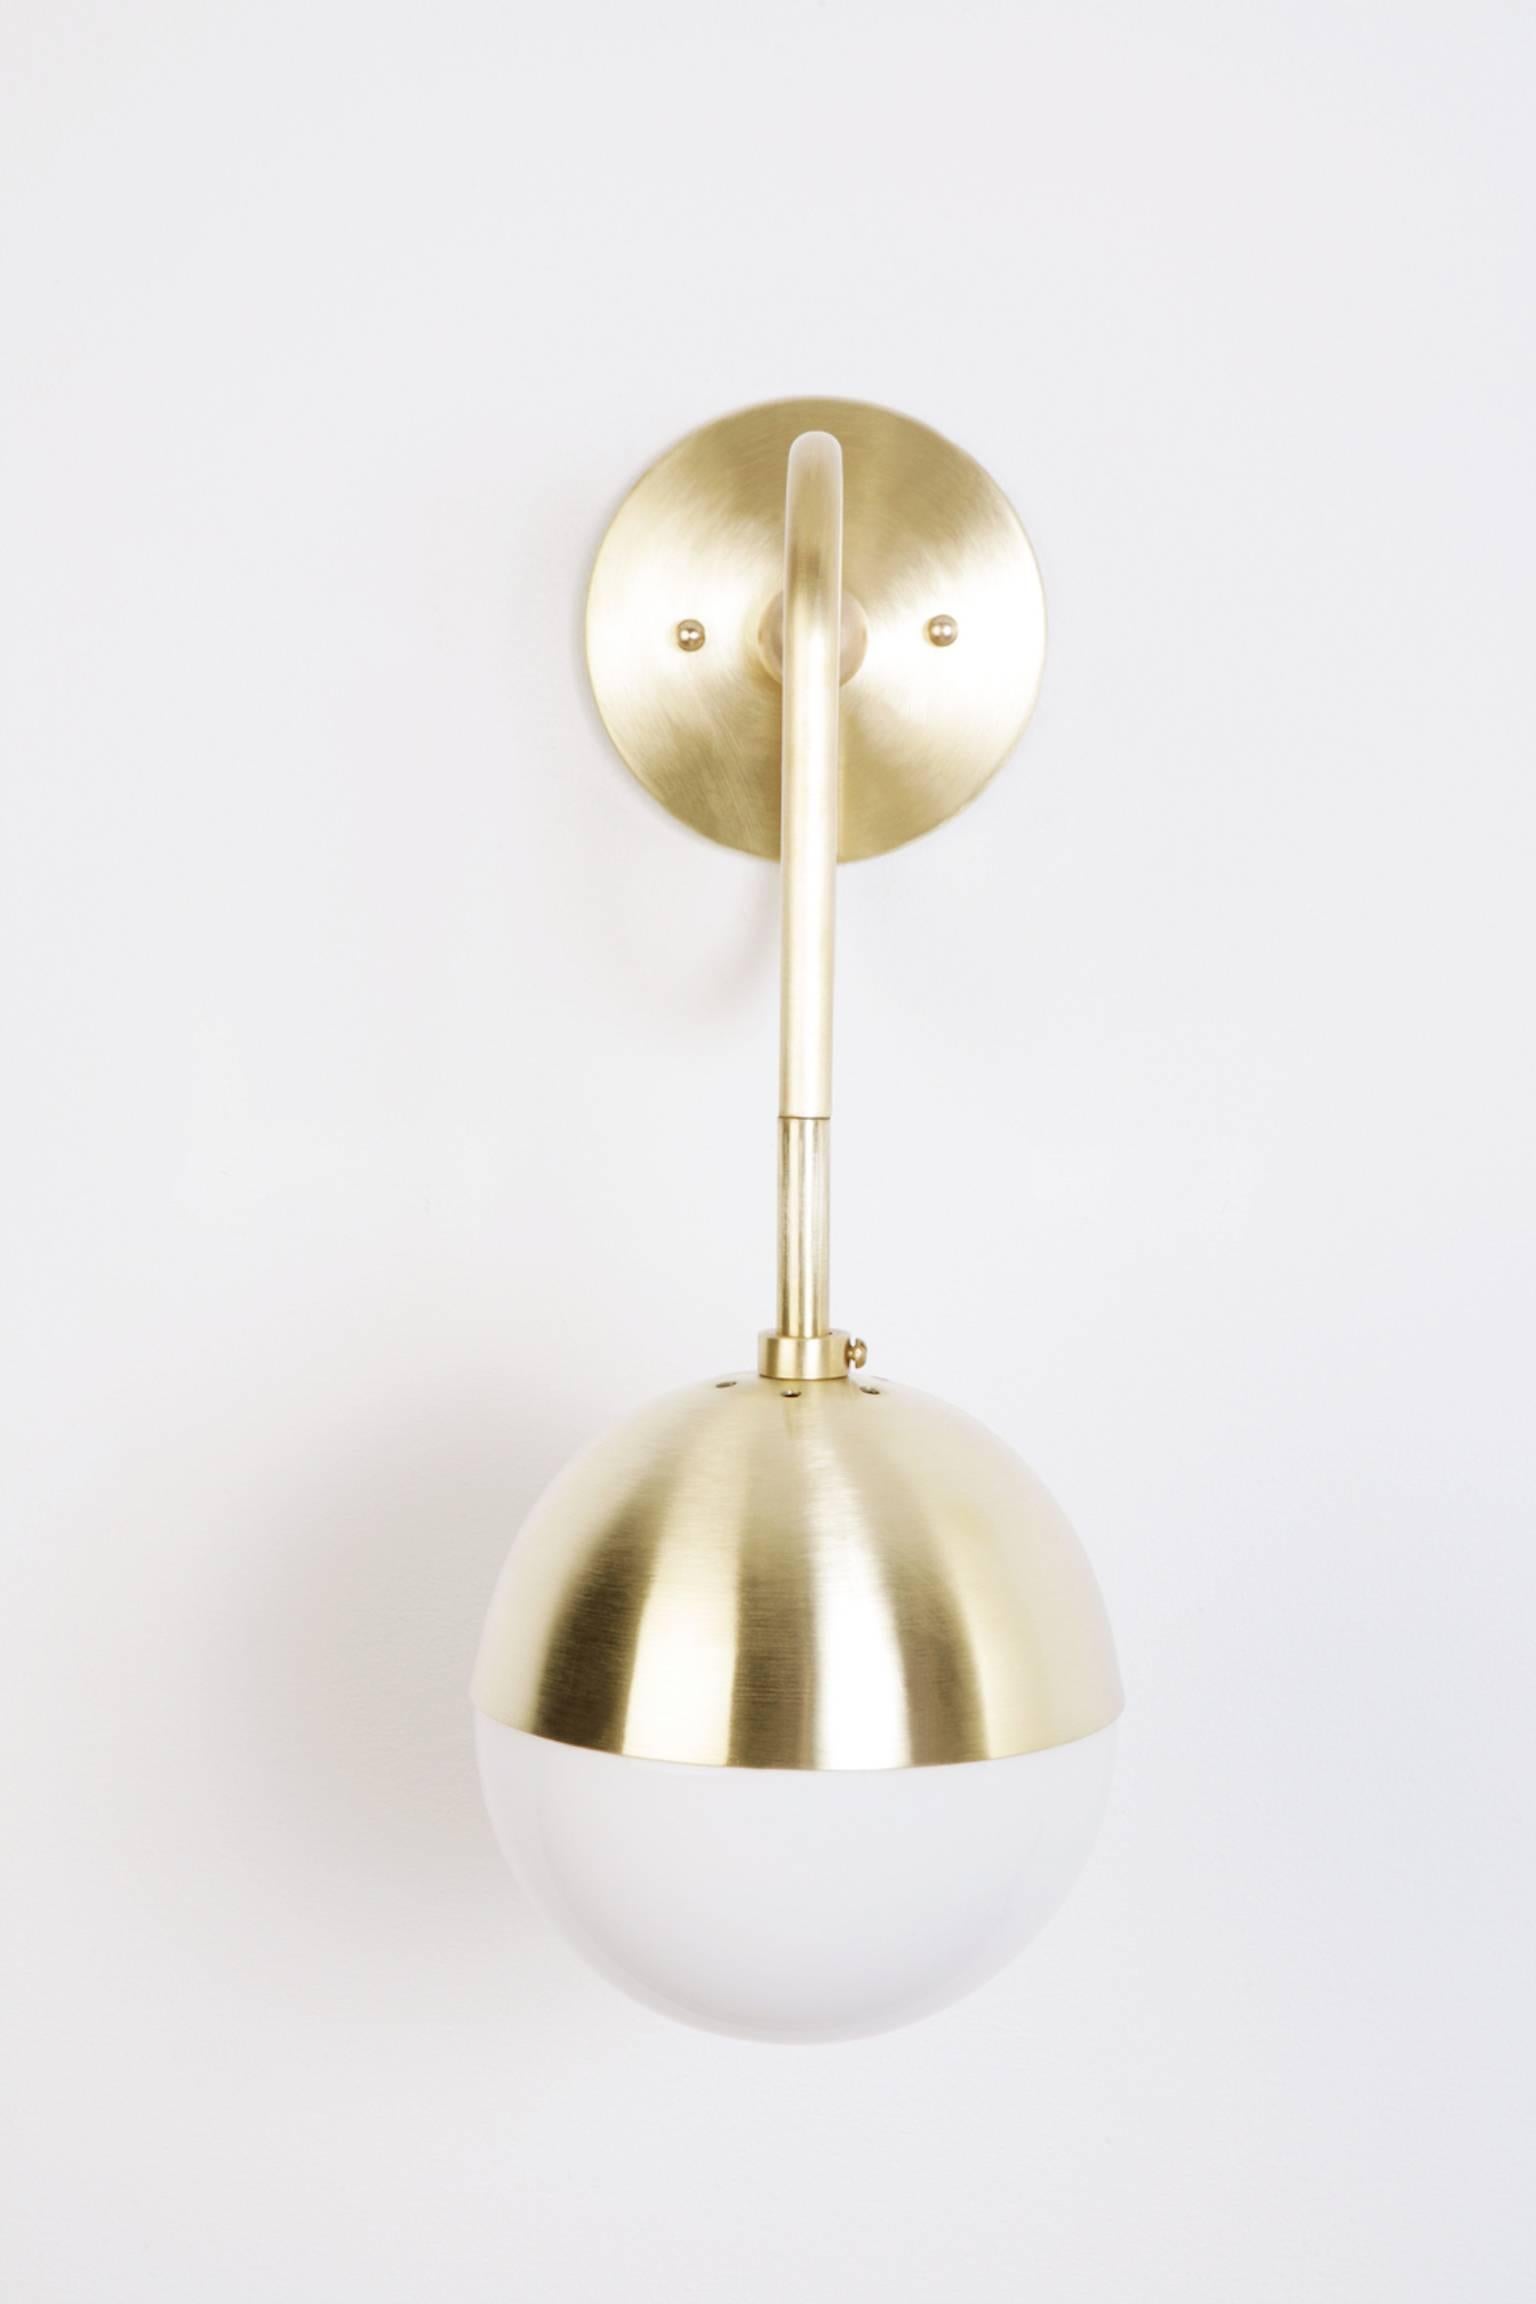 Playful and graphic the Balise is inspired by the 1960s and the irreverence of Jean Royère. The Balise is fabricated in brass with brass details and a 6